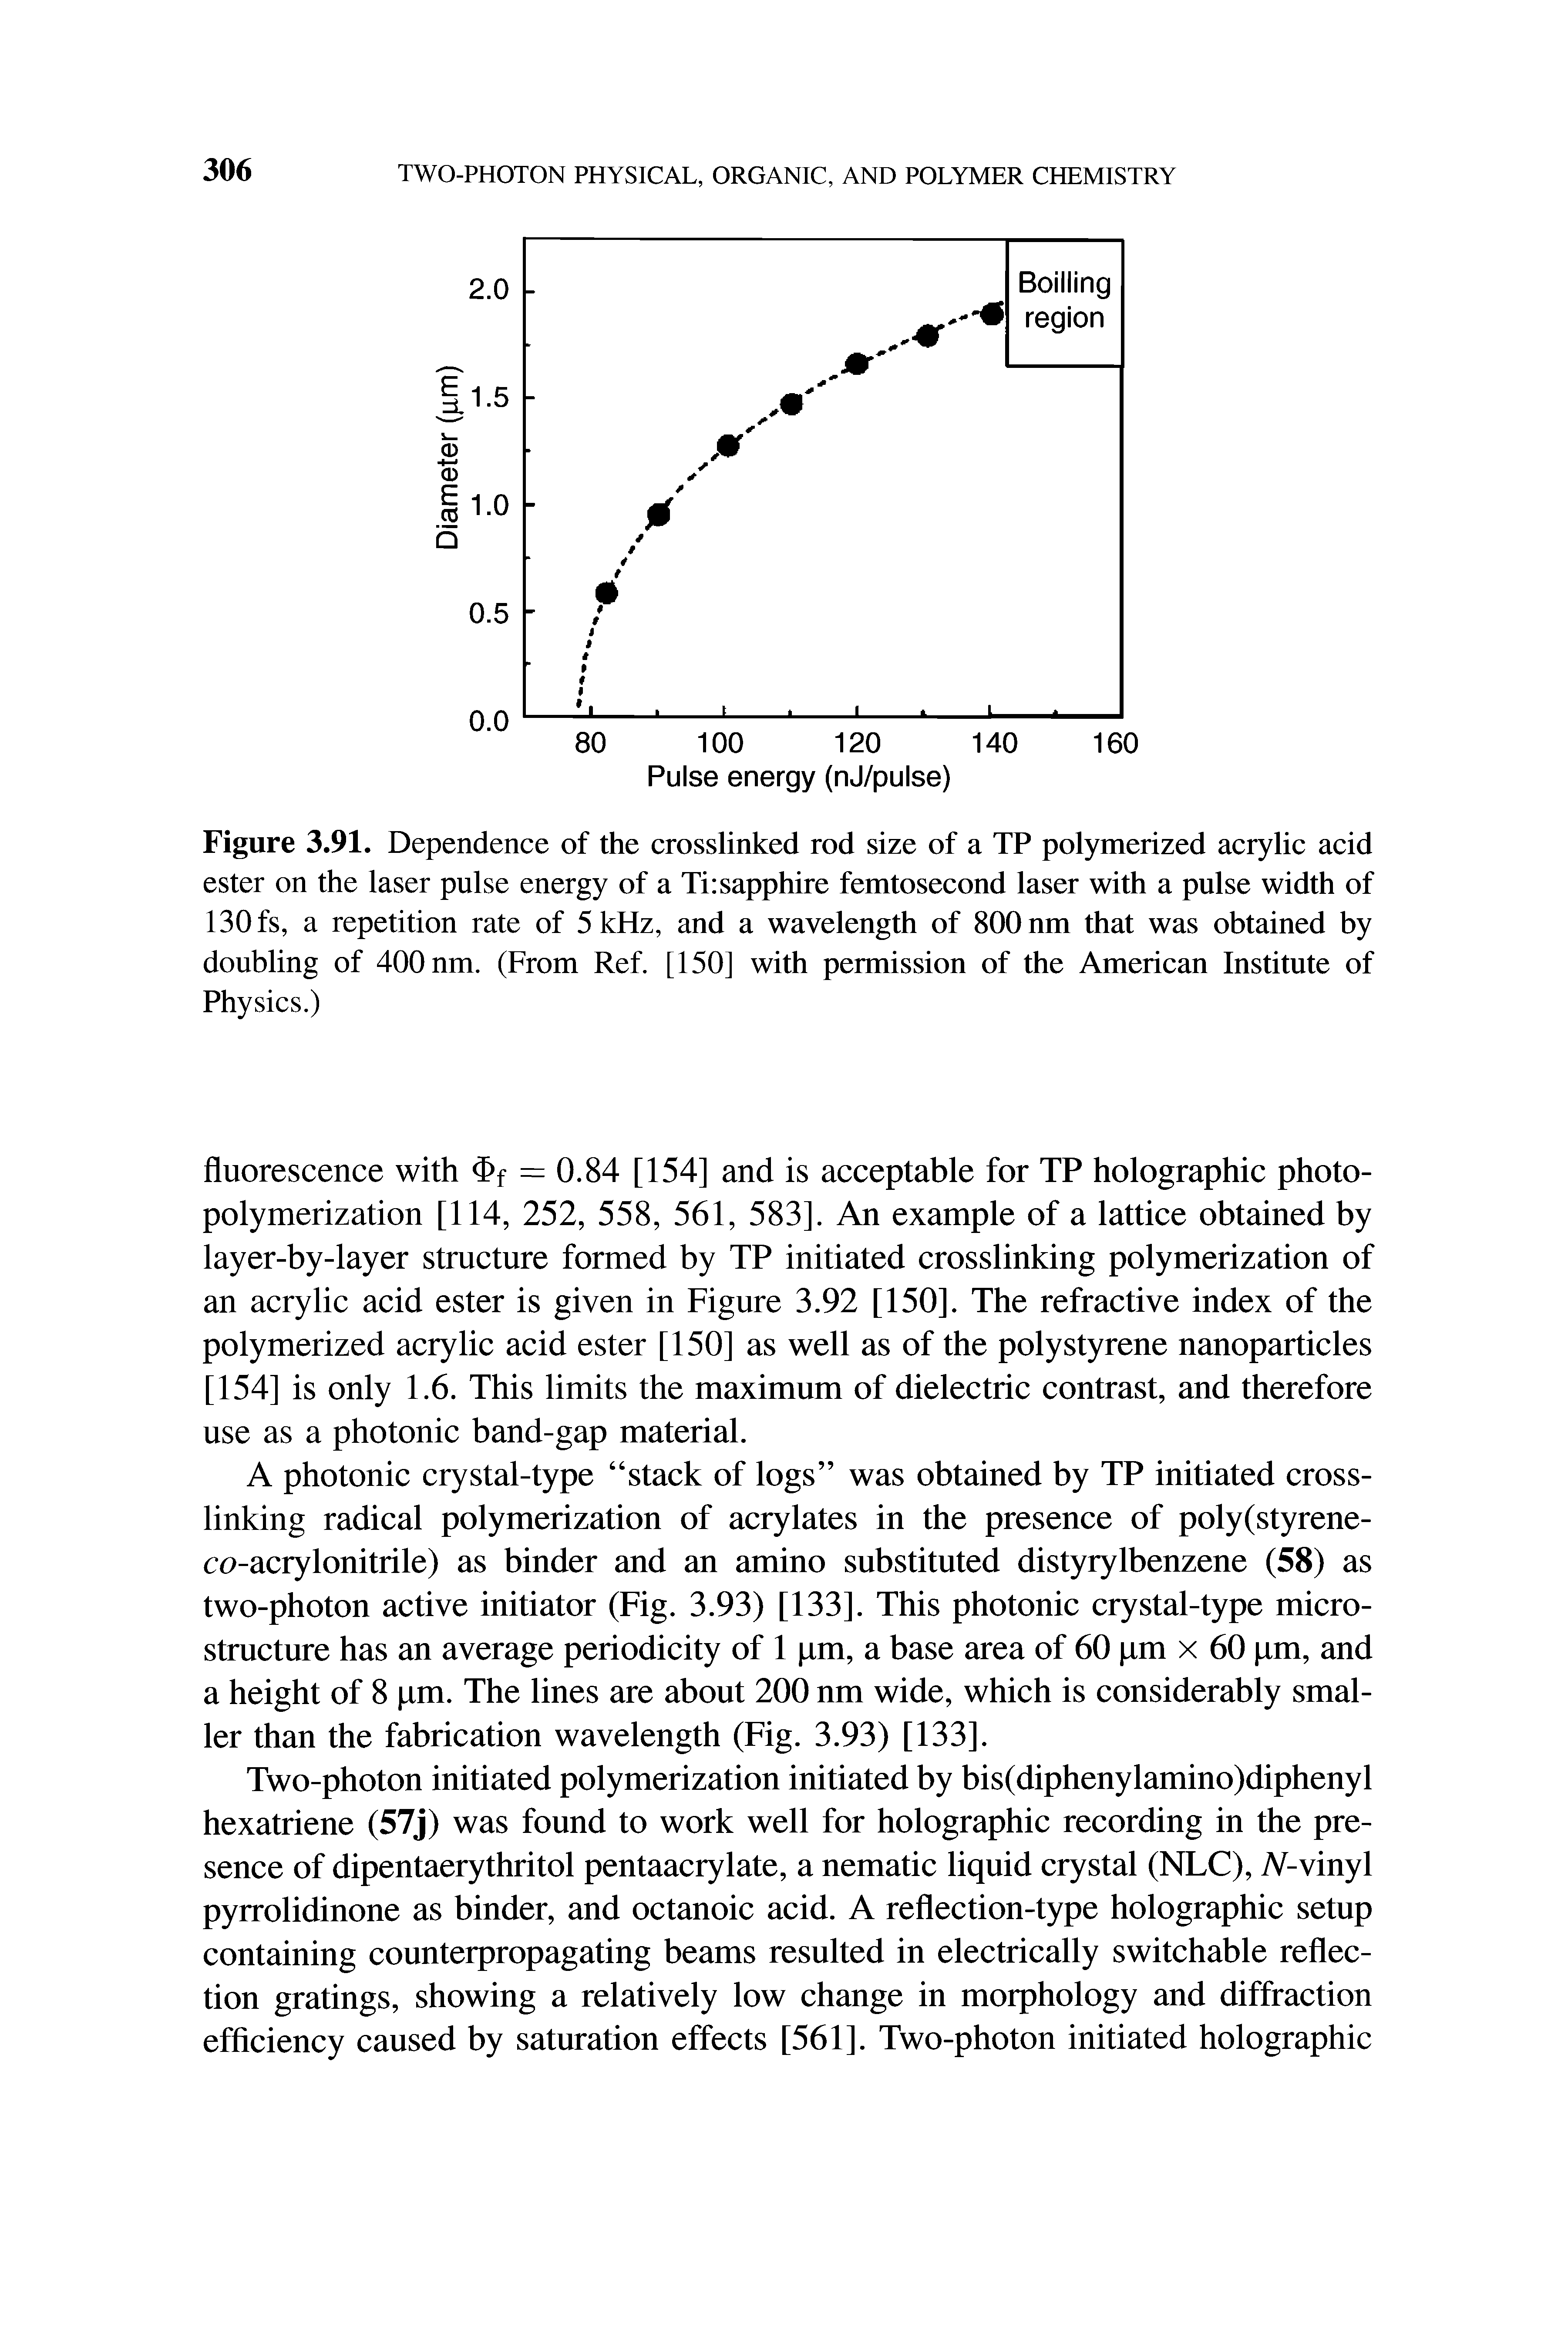 Figure 3.91. Dependence of the crosslinked rod size of a TP polymerized acrylic acid ester on the laser pulse energy of a Ti sapphire femtosecond laser with a pulse width of 130 fs, a repetition rate of 5 kHz, and a wavelength of 800 nm that was obtained by doubling of 400 nm. (From Ref. [150] with permission of the American Institute of Physics.)...